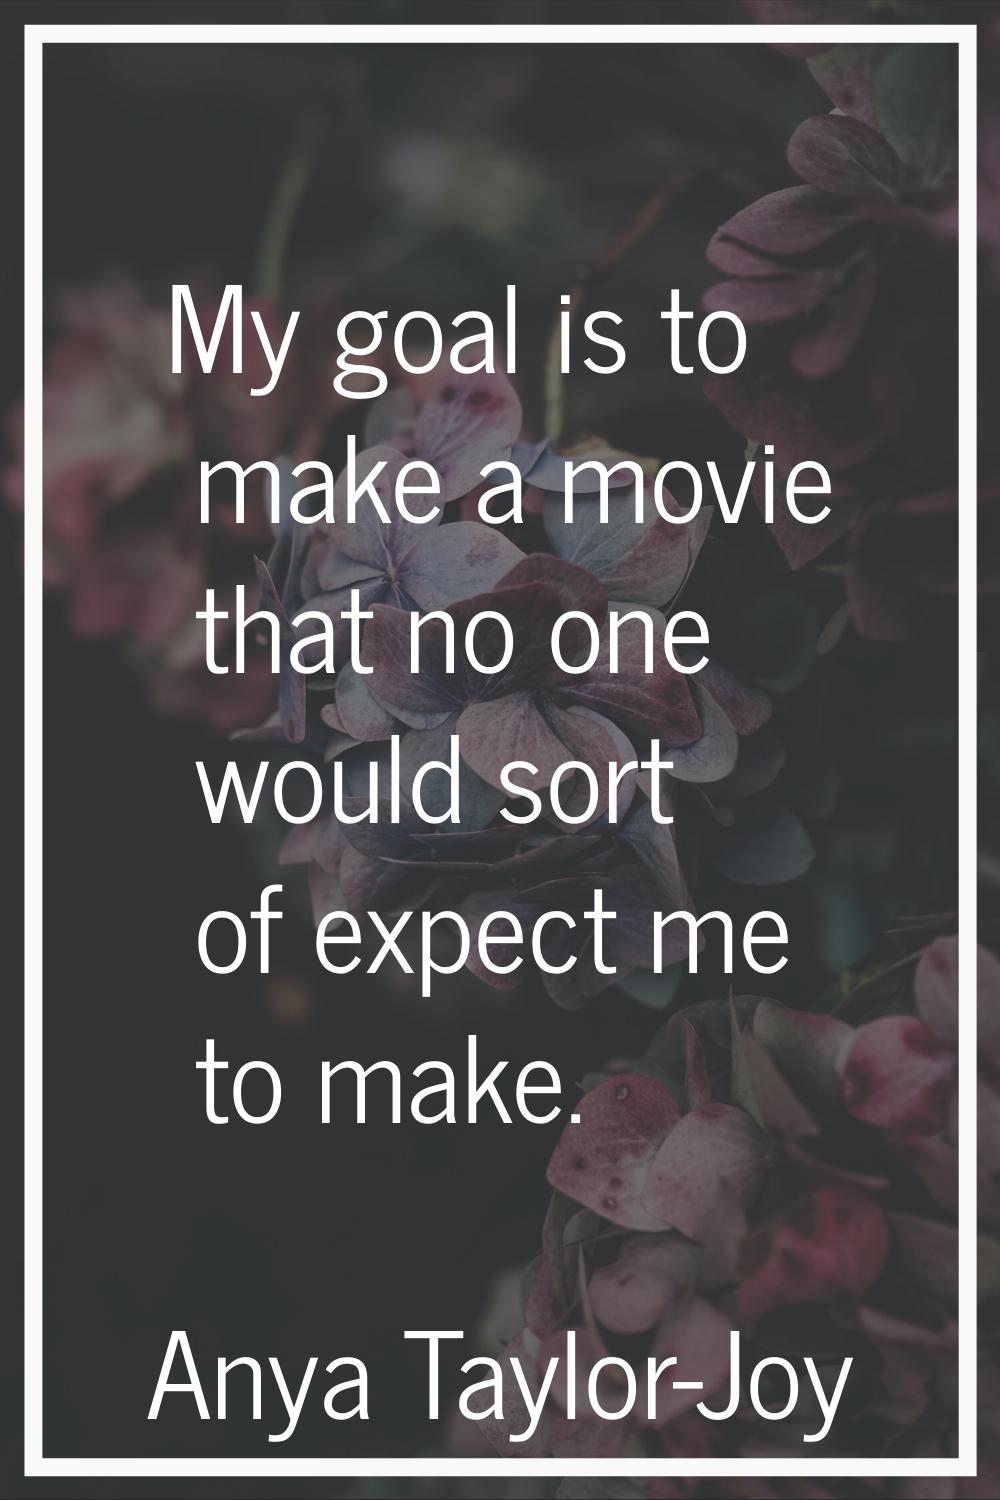 My goal is to make a movie that no one would sort of expect me to make.